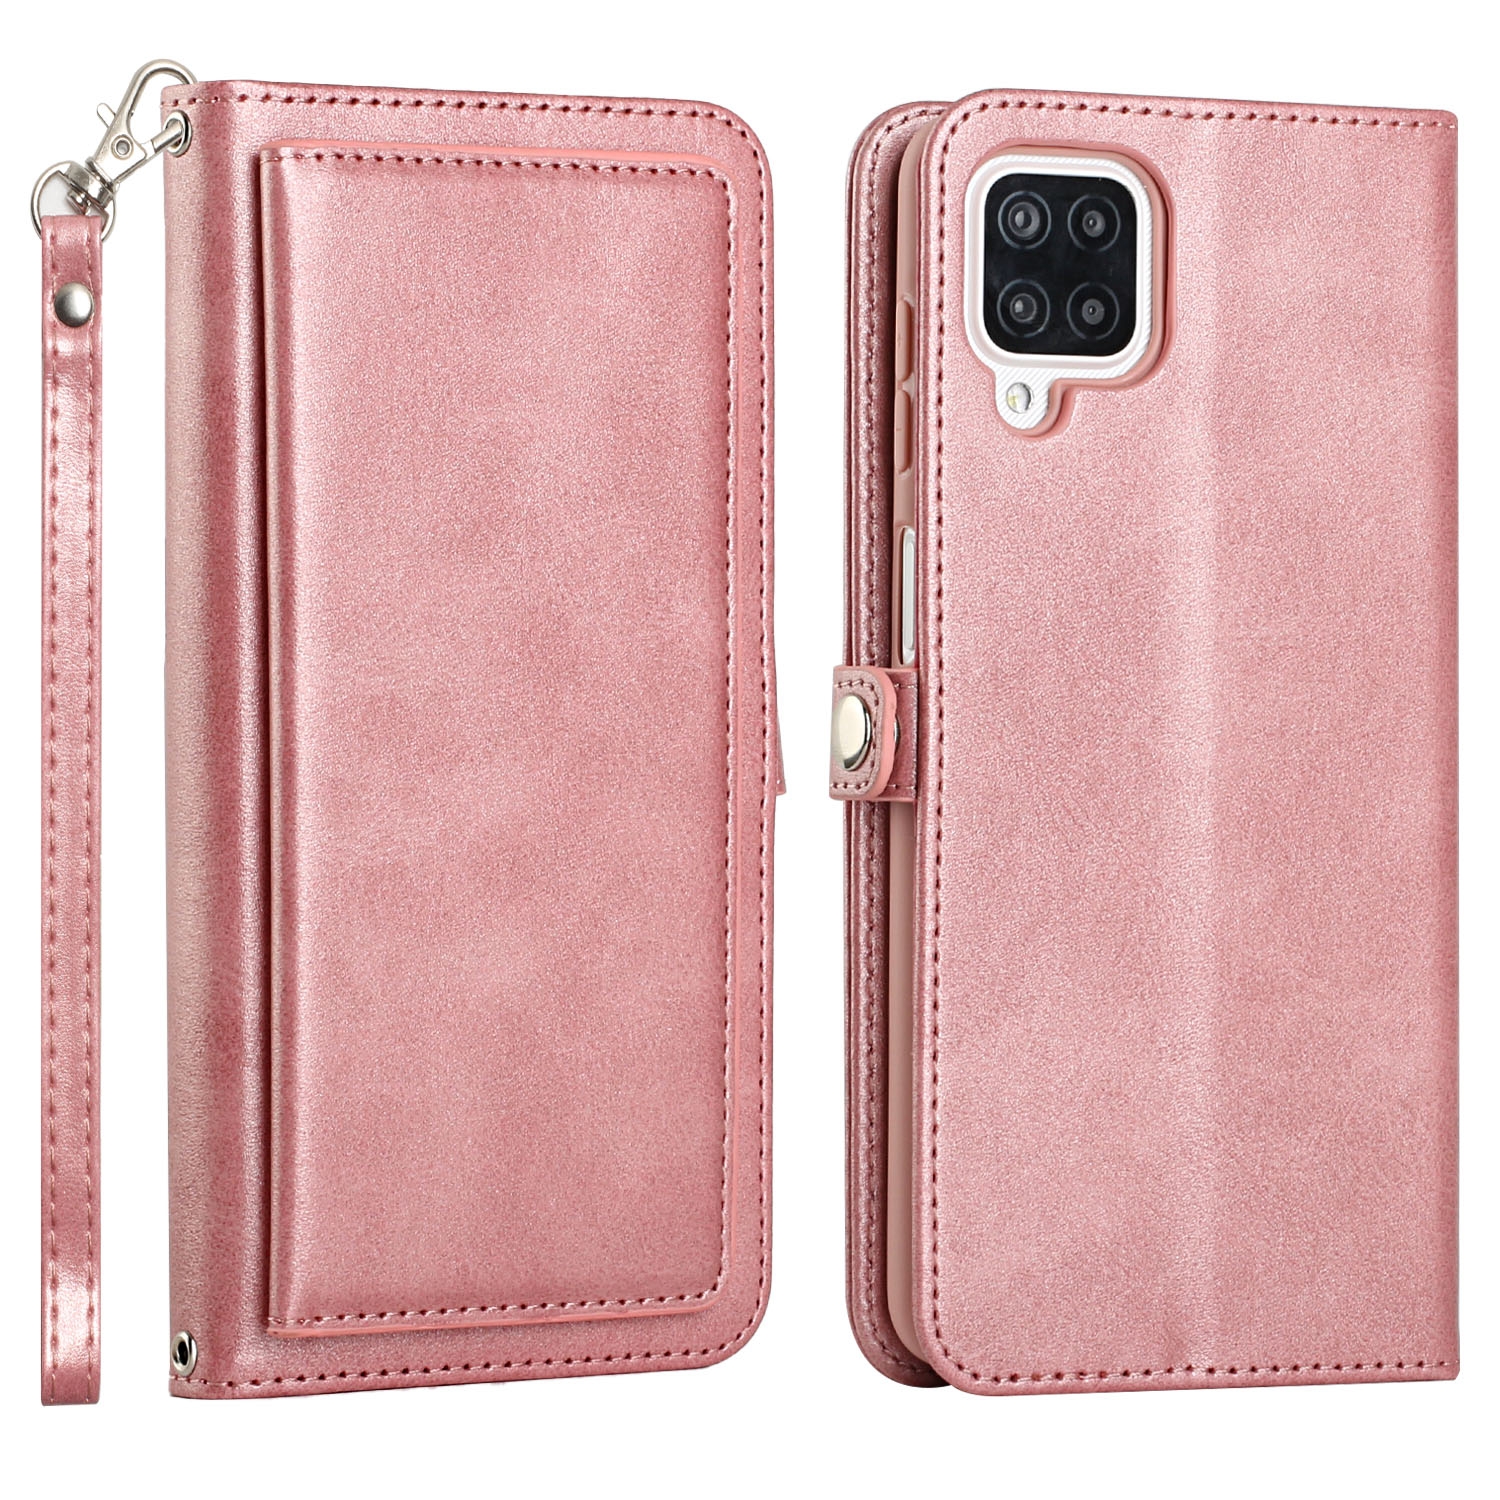 Premium PU Leather Folio WALLET Front Cover Case for Galaxy A12 (Rose Gold)